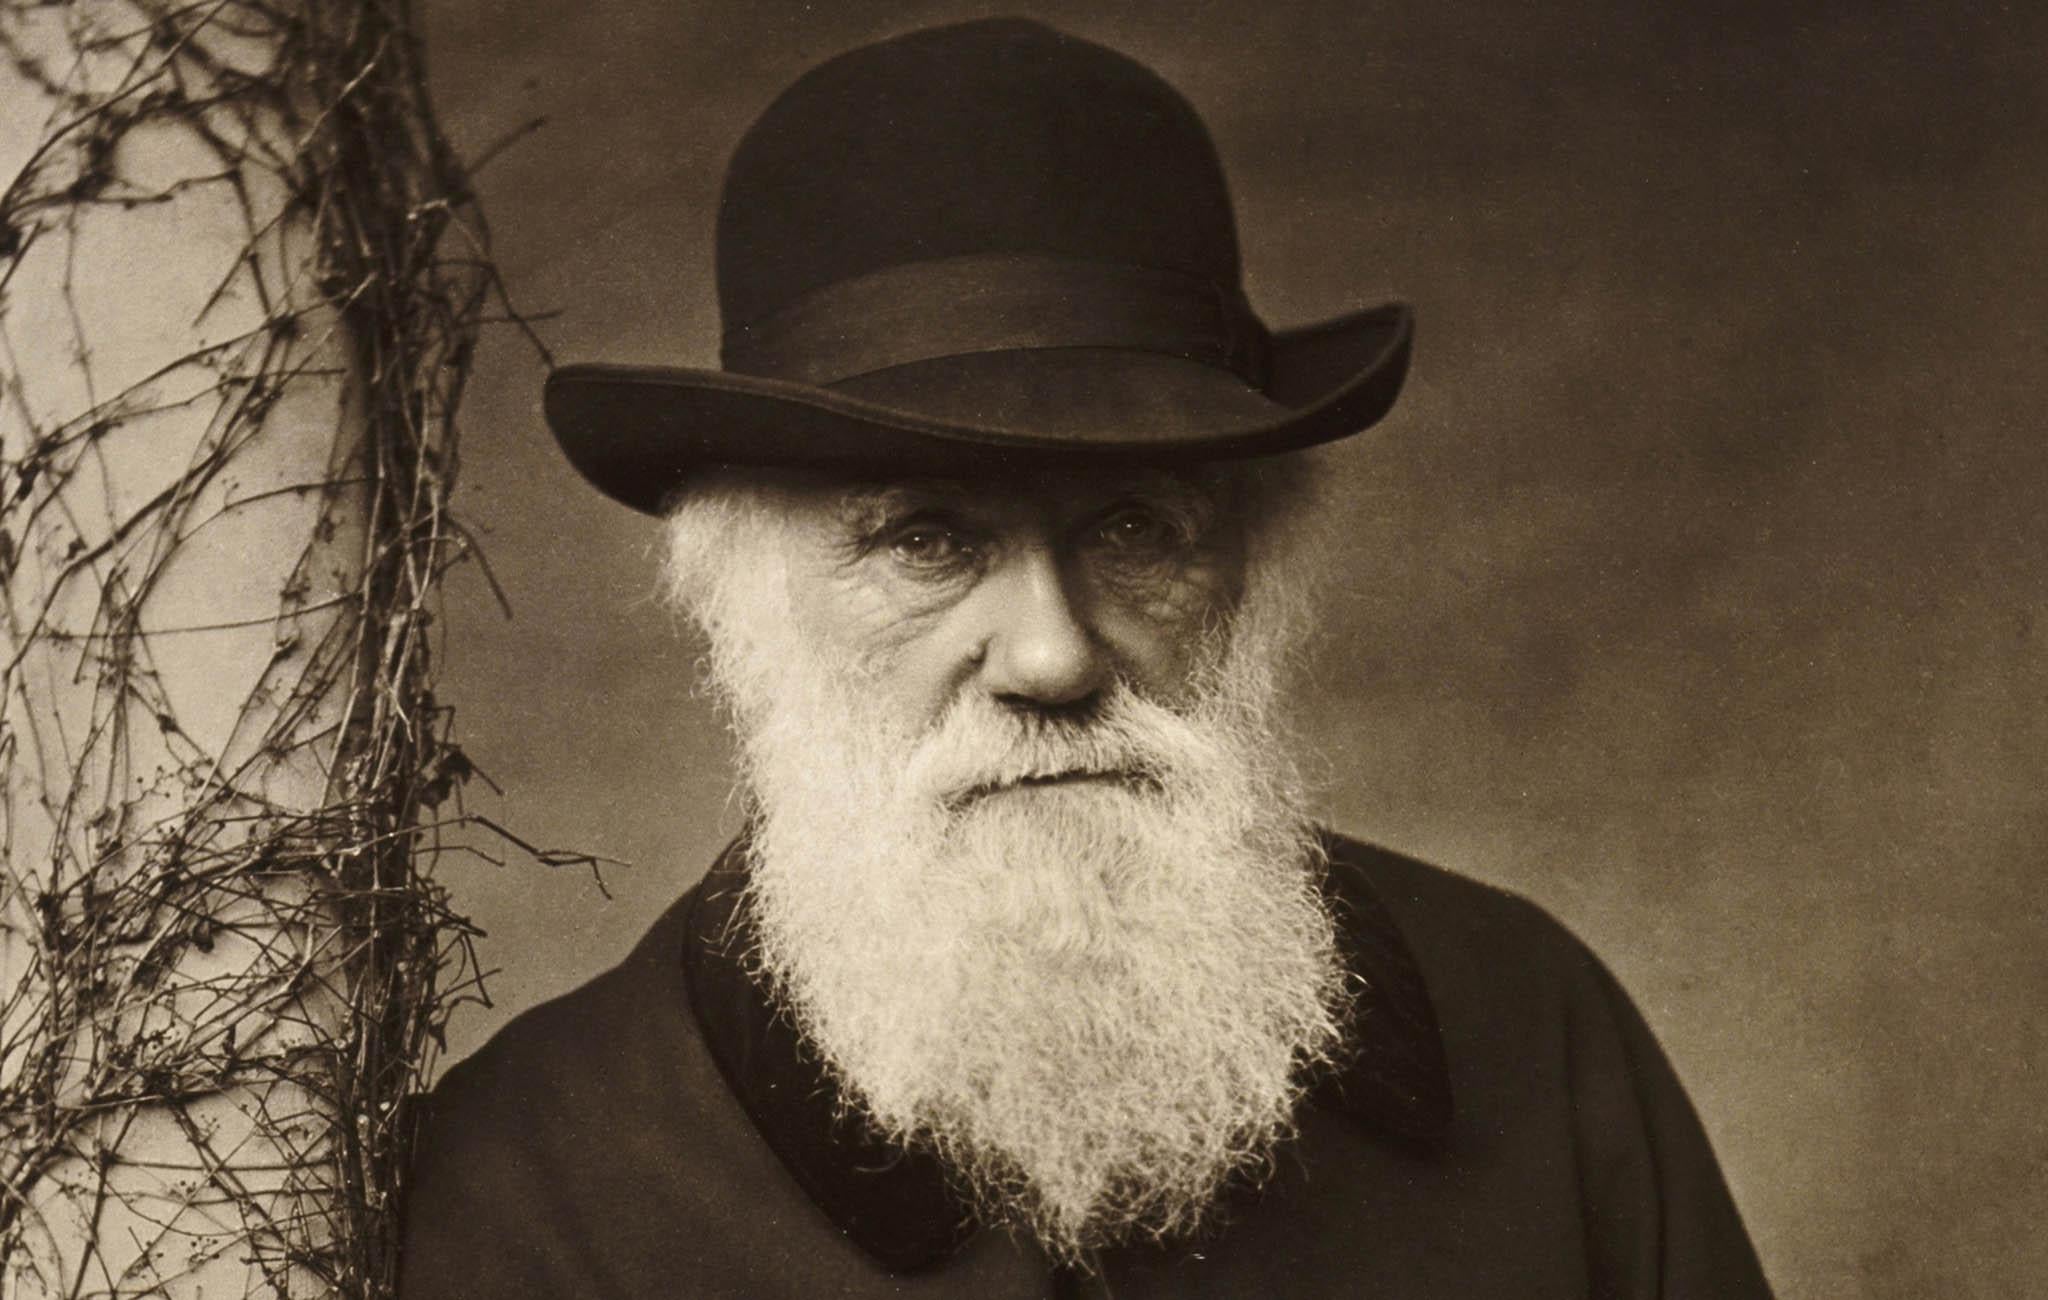 Scientists have long struggled to square altruism with Charles Darwin's theory of evolution